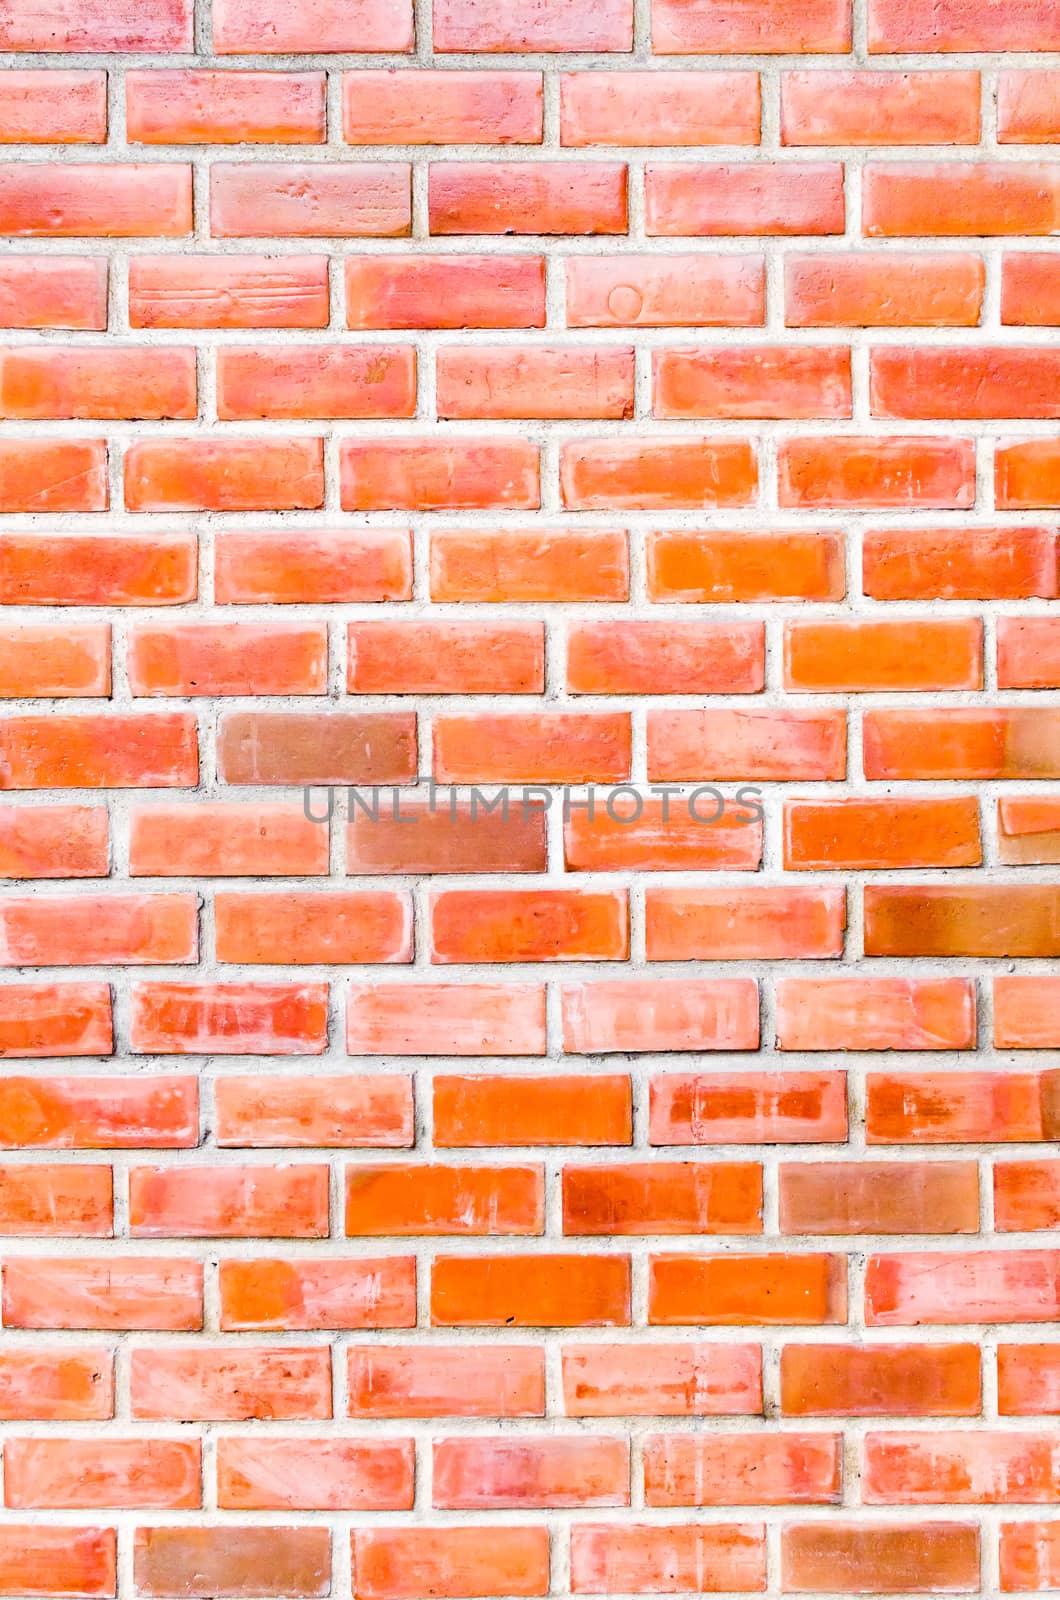 High resolution pictures background of old vintage brick wall